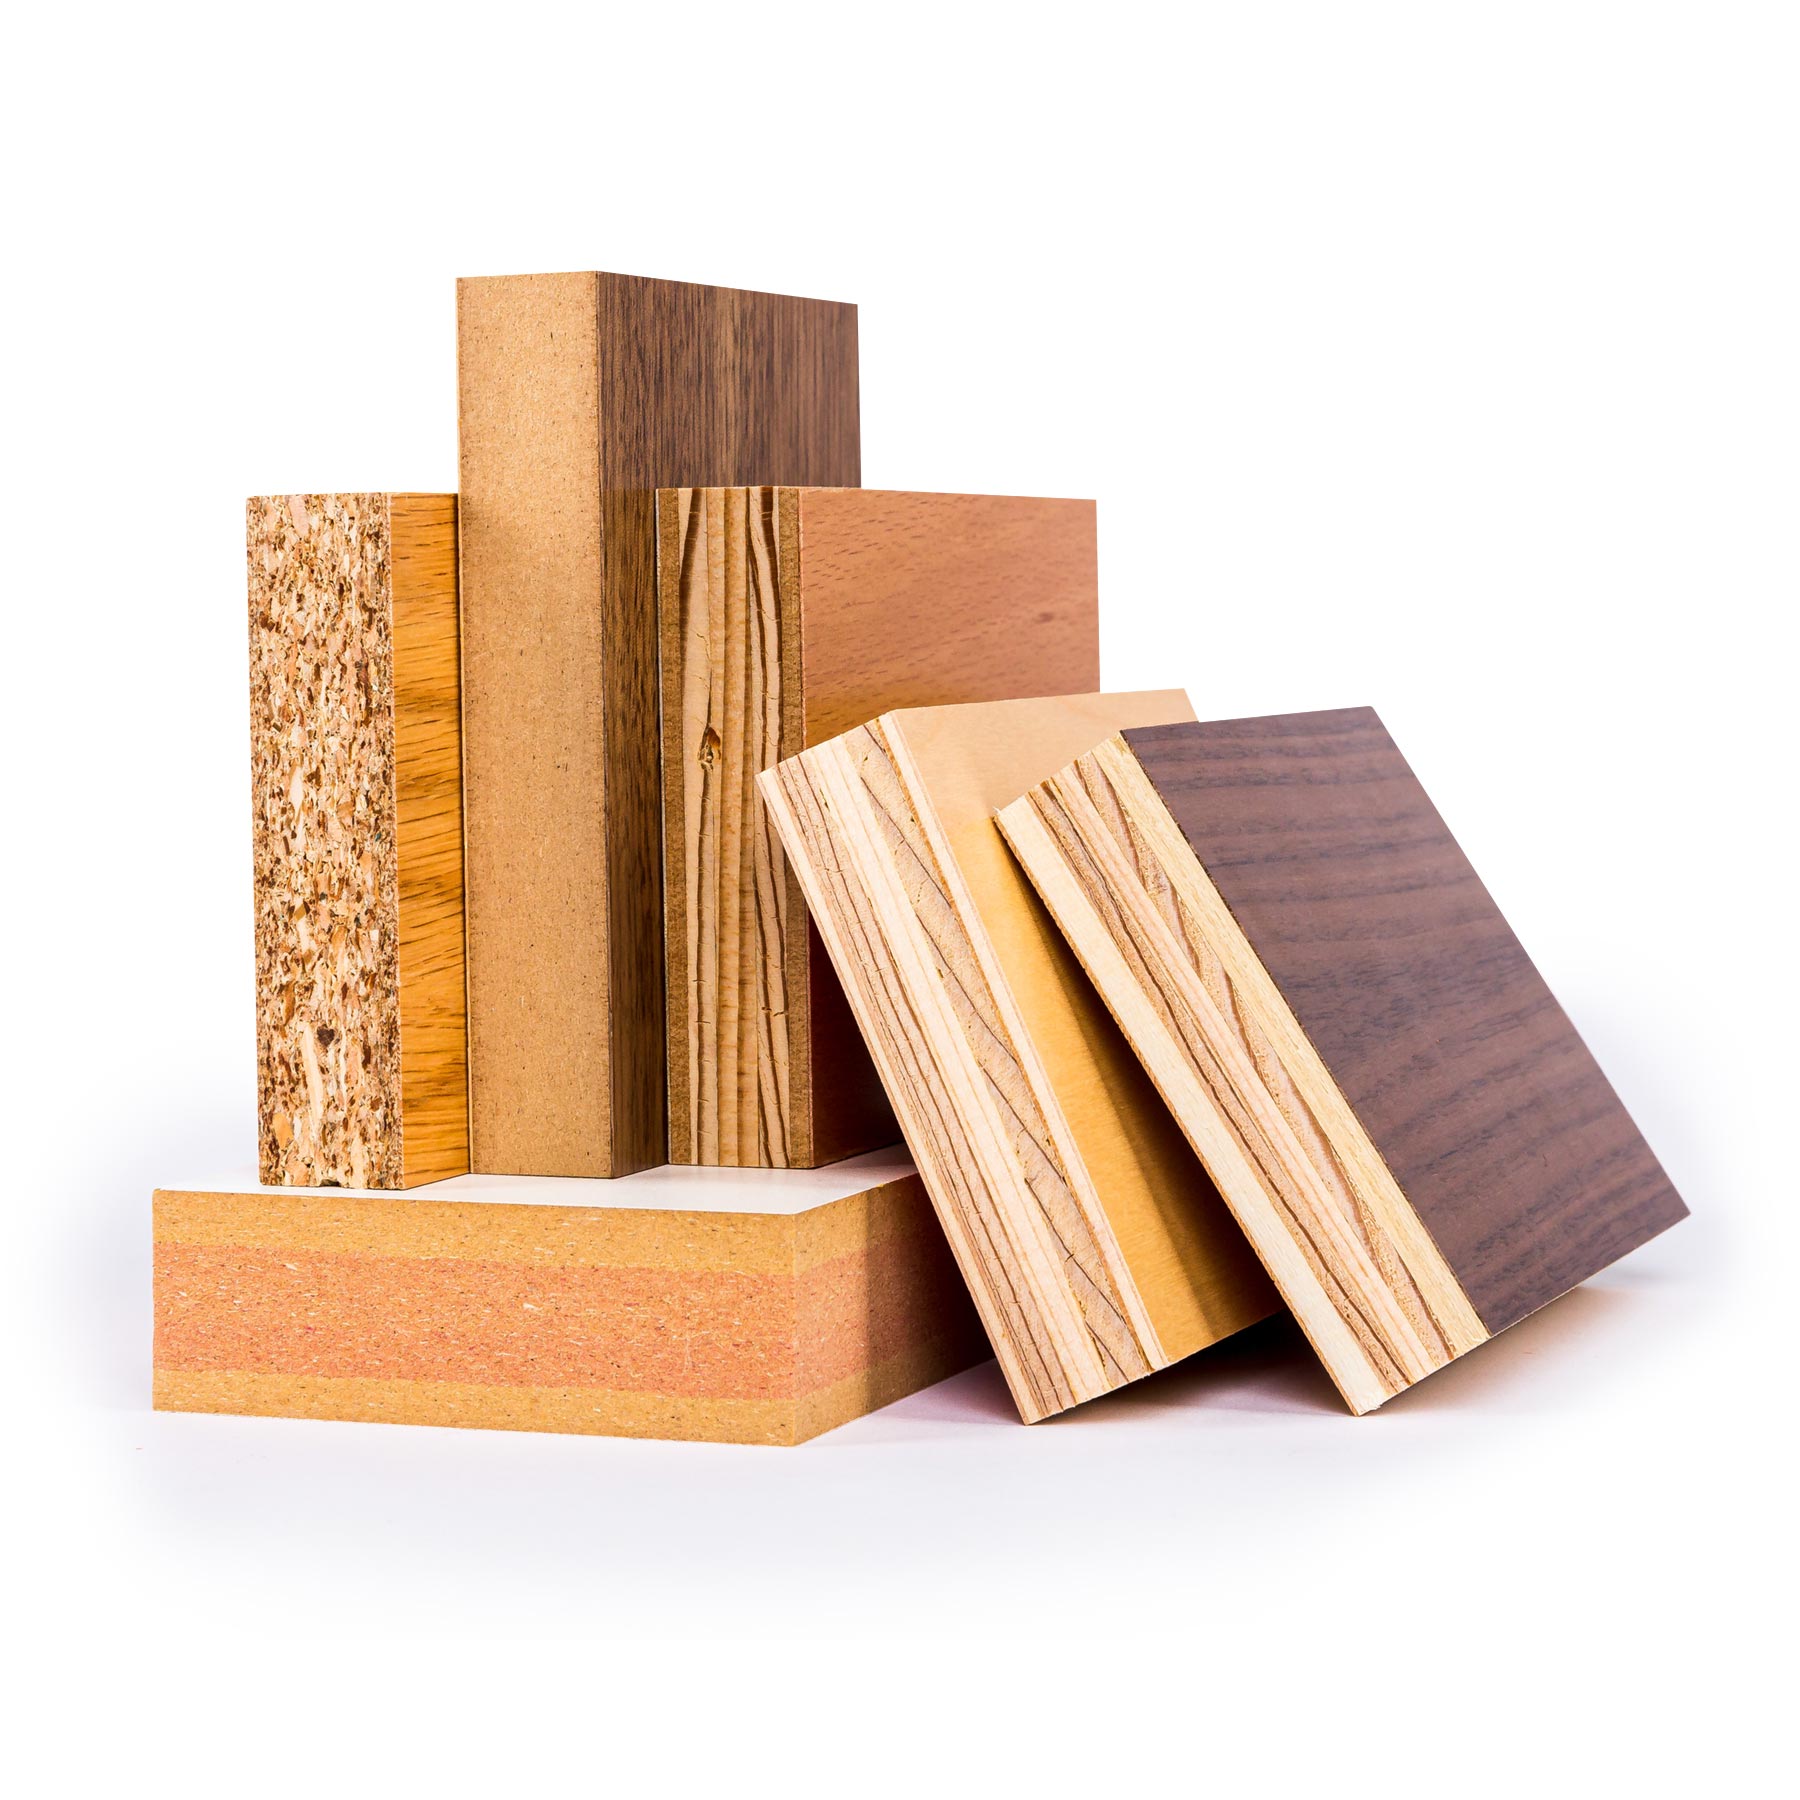 Plywood Dealers in Hyderabad | Gupta Plywood And Hardware | Plywood Dealers in Hyderabad,top Plywood Dealers in Hyderabad,Best Plywood Dealers in Hyderabad,Plywood shops in Hyderabad,Best Plywood Shops in Hyderabad,Top Plywood shops in Hyderabad,Plywood Dealer - GL105794